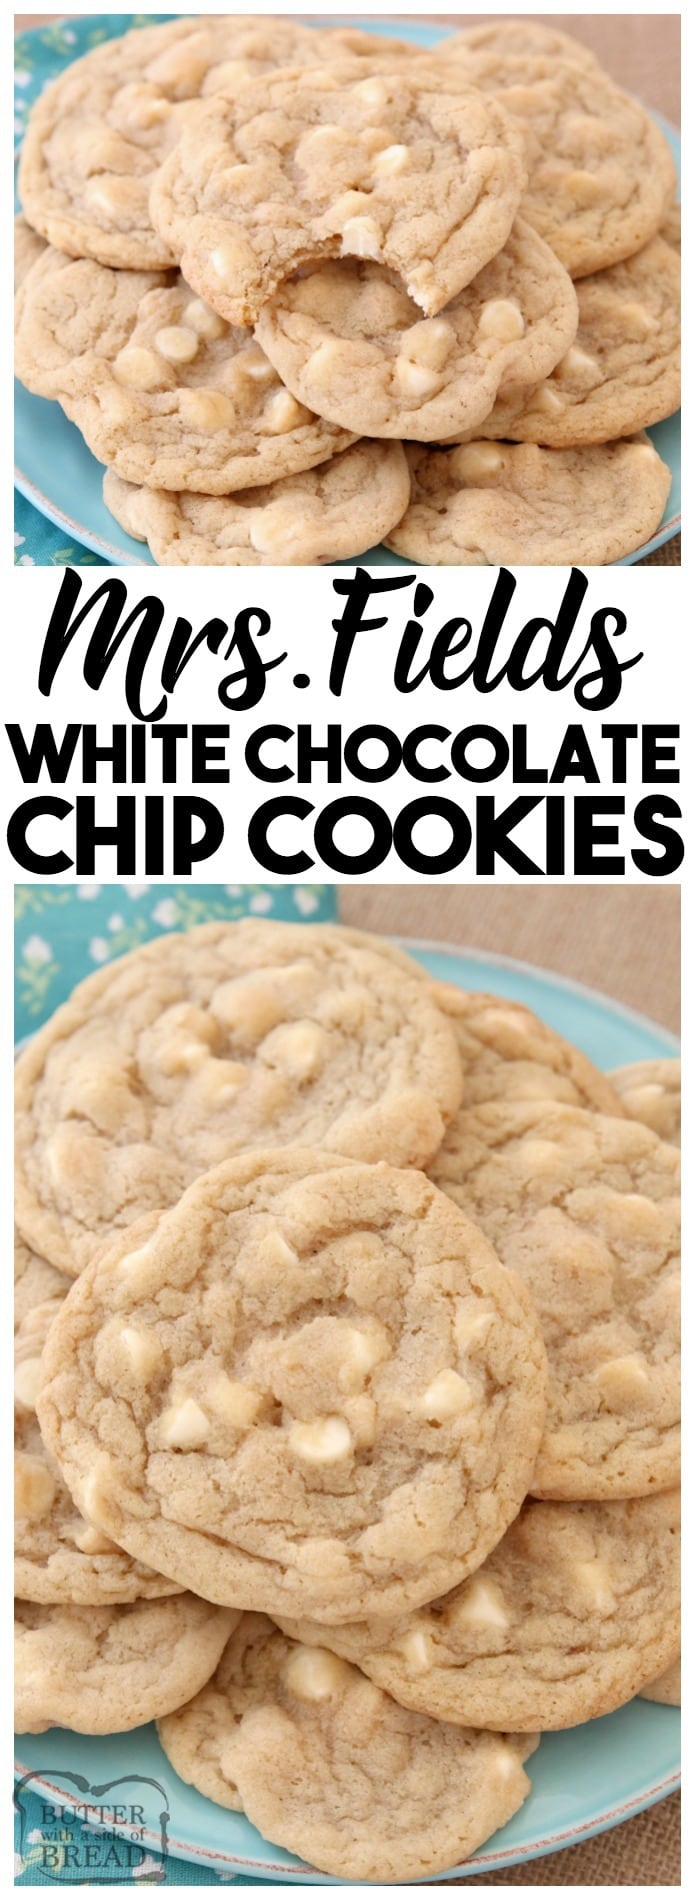 MRS. FIELDS WHITE CHOCOLATE CHIP COOKIES - Butter with a Side of Bread